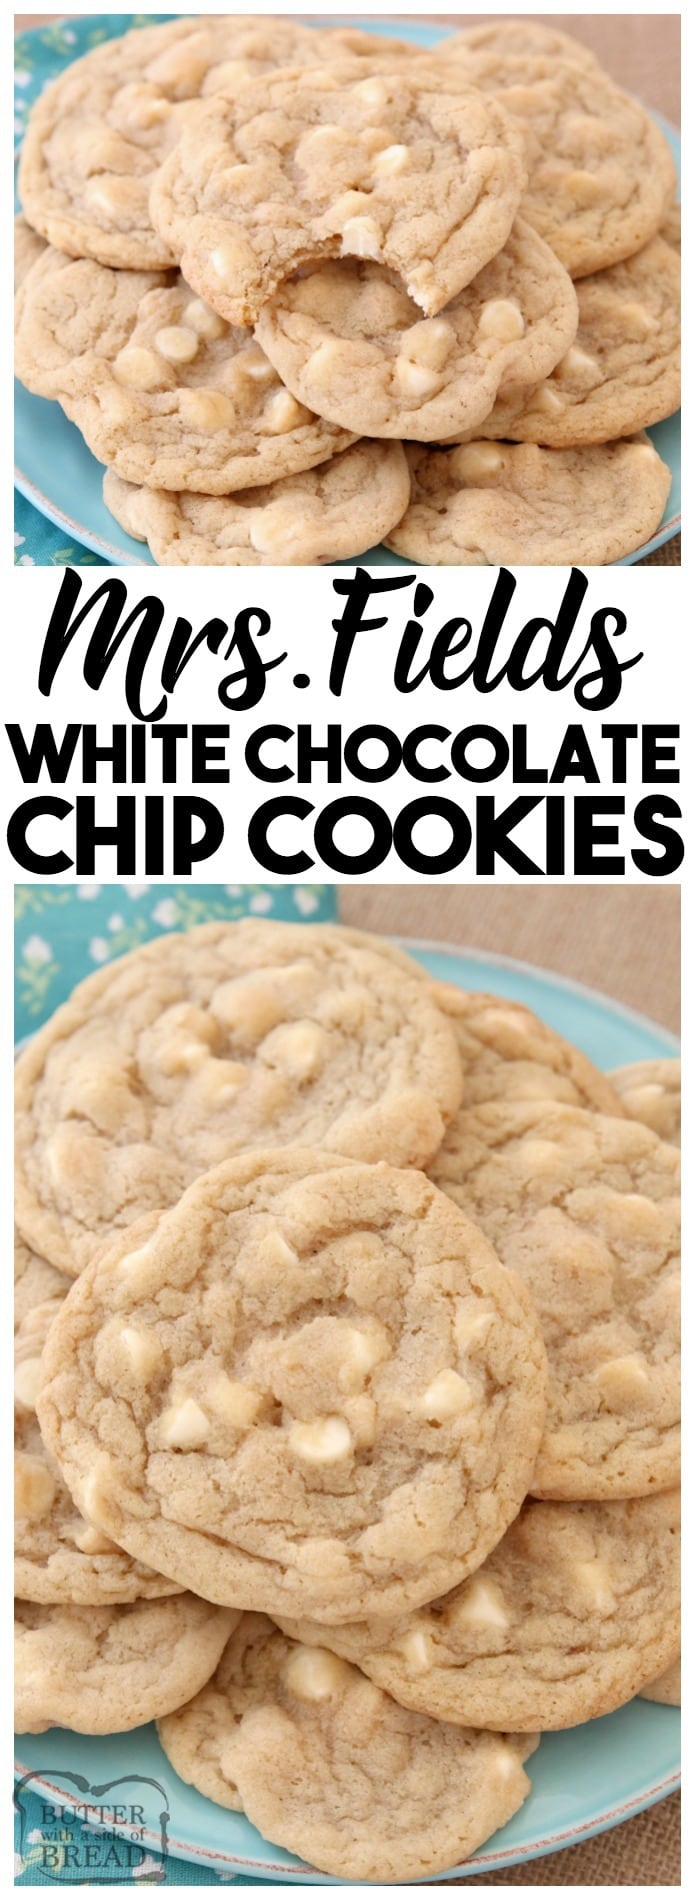 MRS. FIELDS WHITE CHOCOLATE CHIP COOKIES - Butter with a Side of Bread